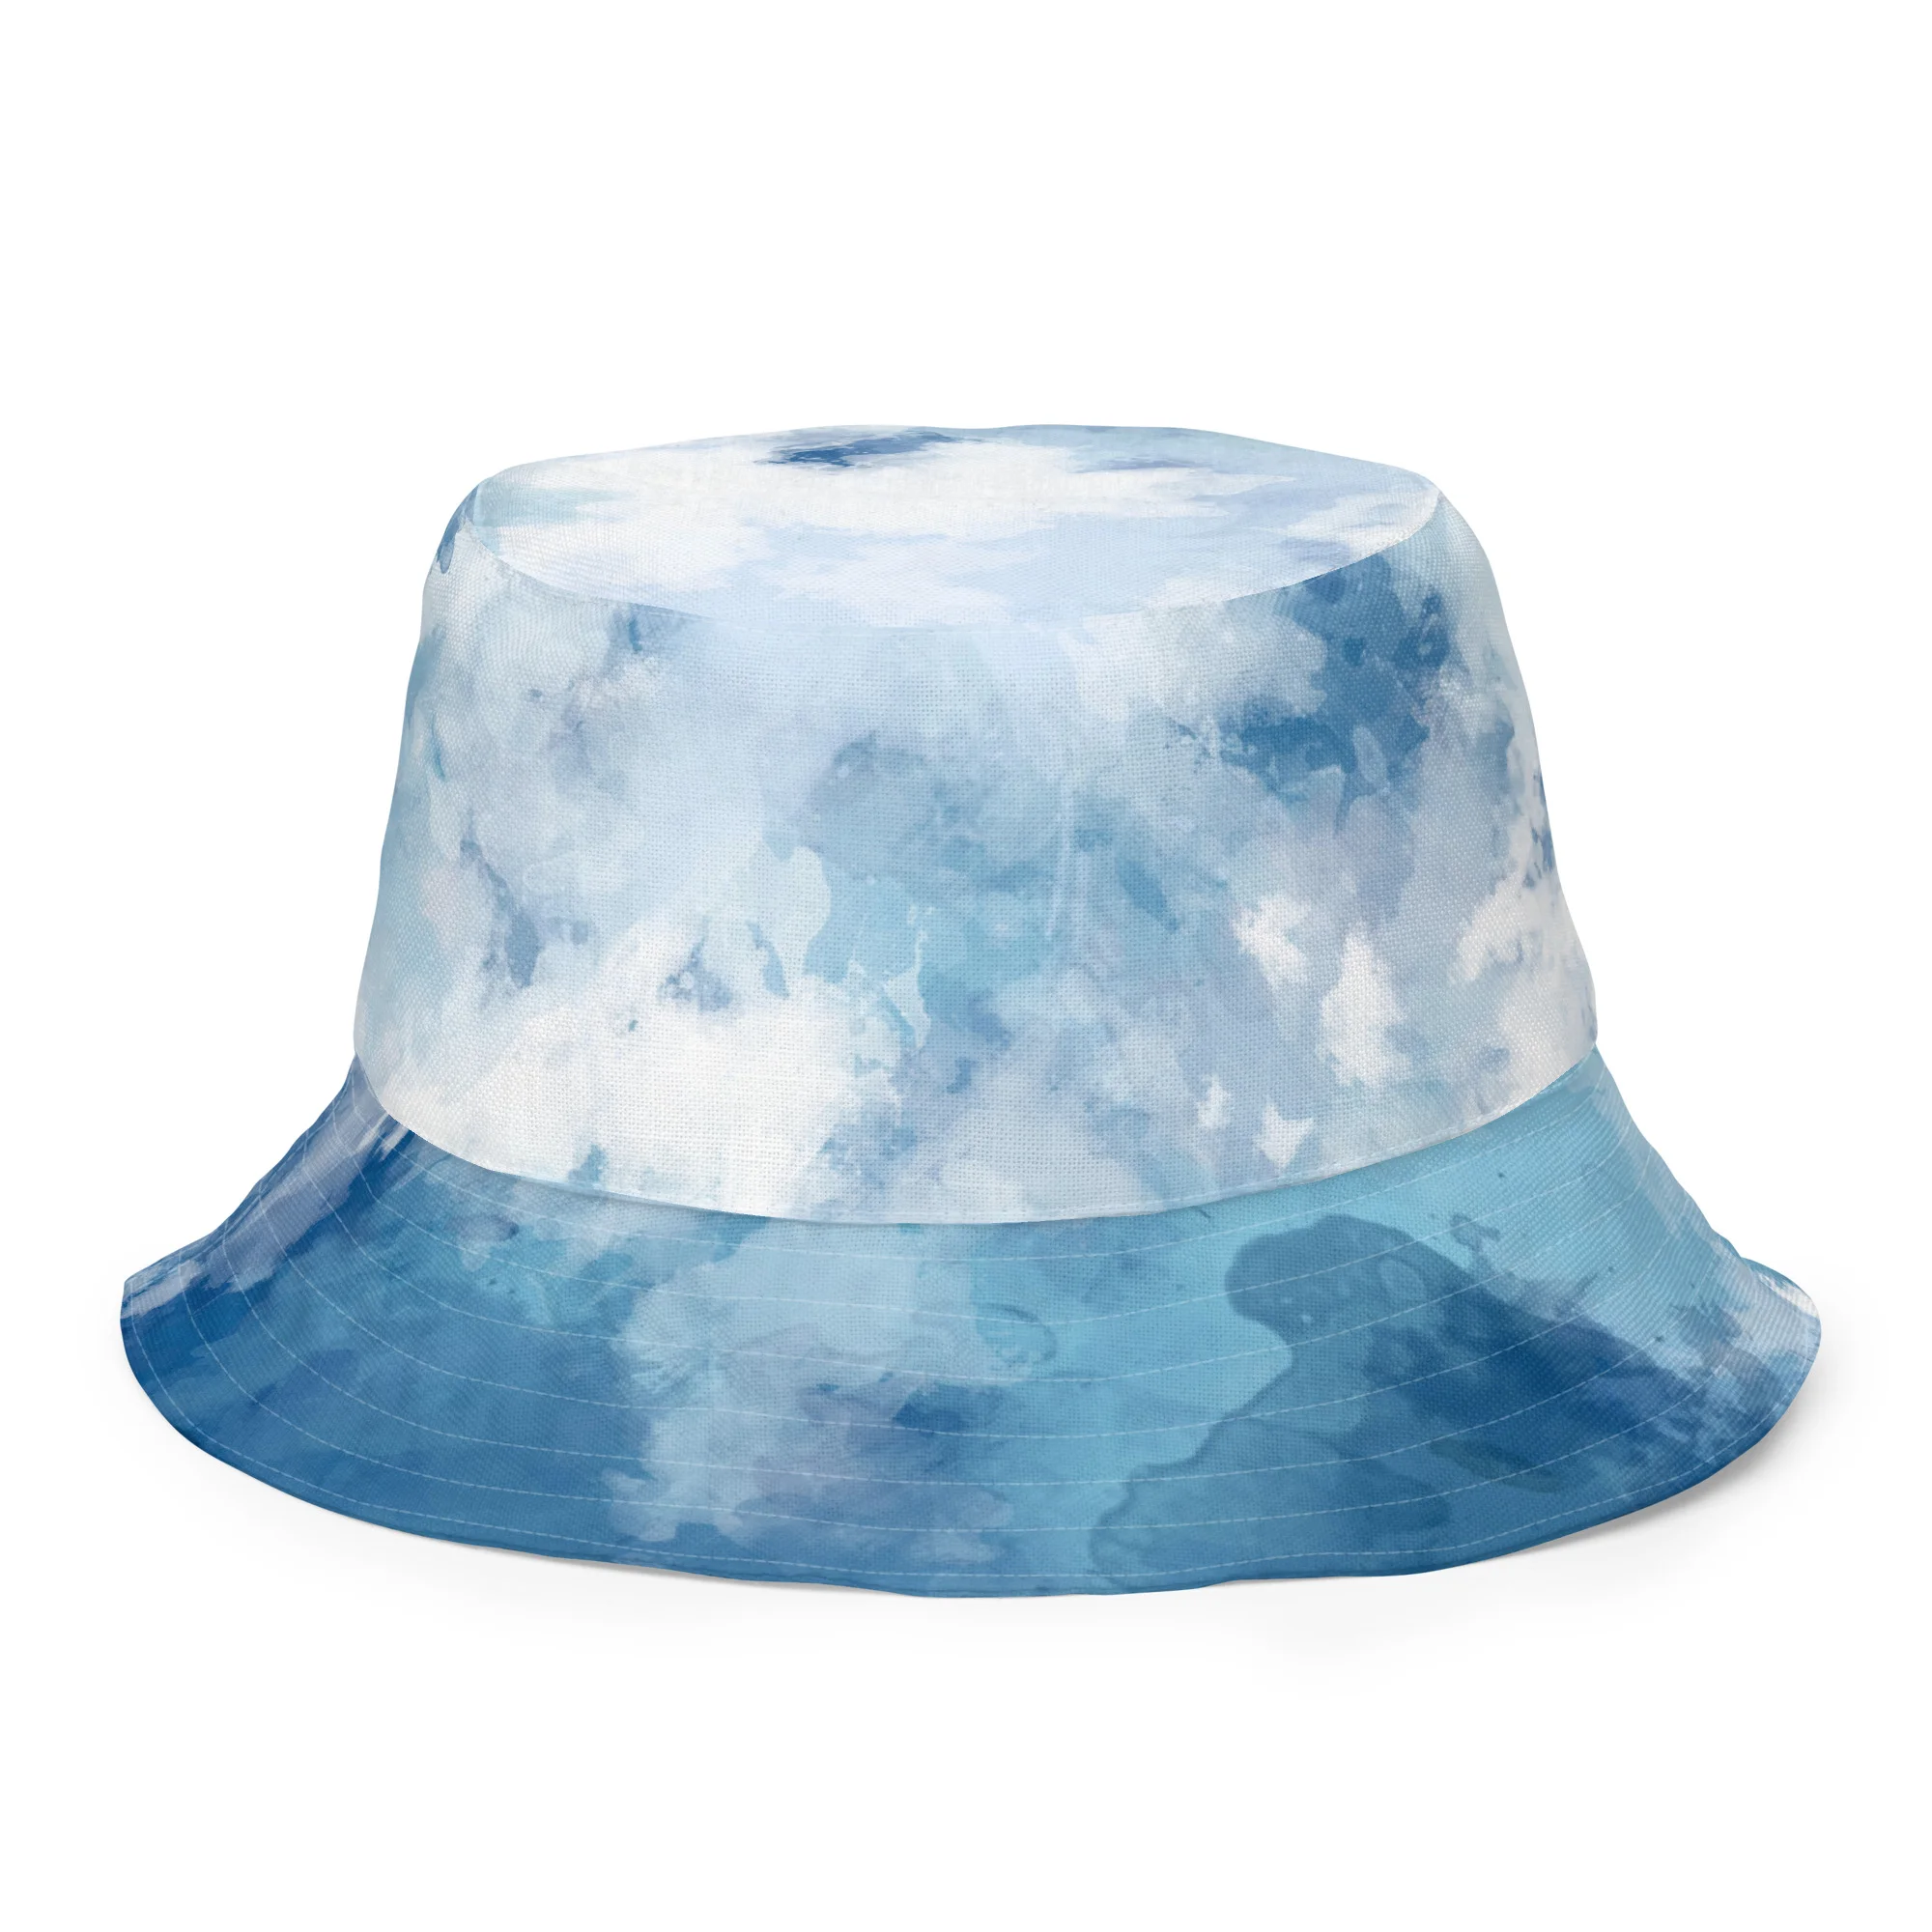 Handsome Double Sided Reversible Bucket Hat